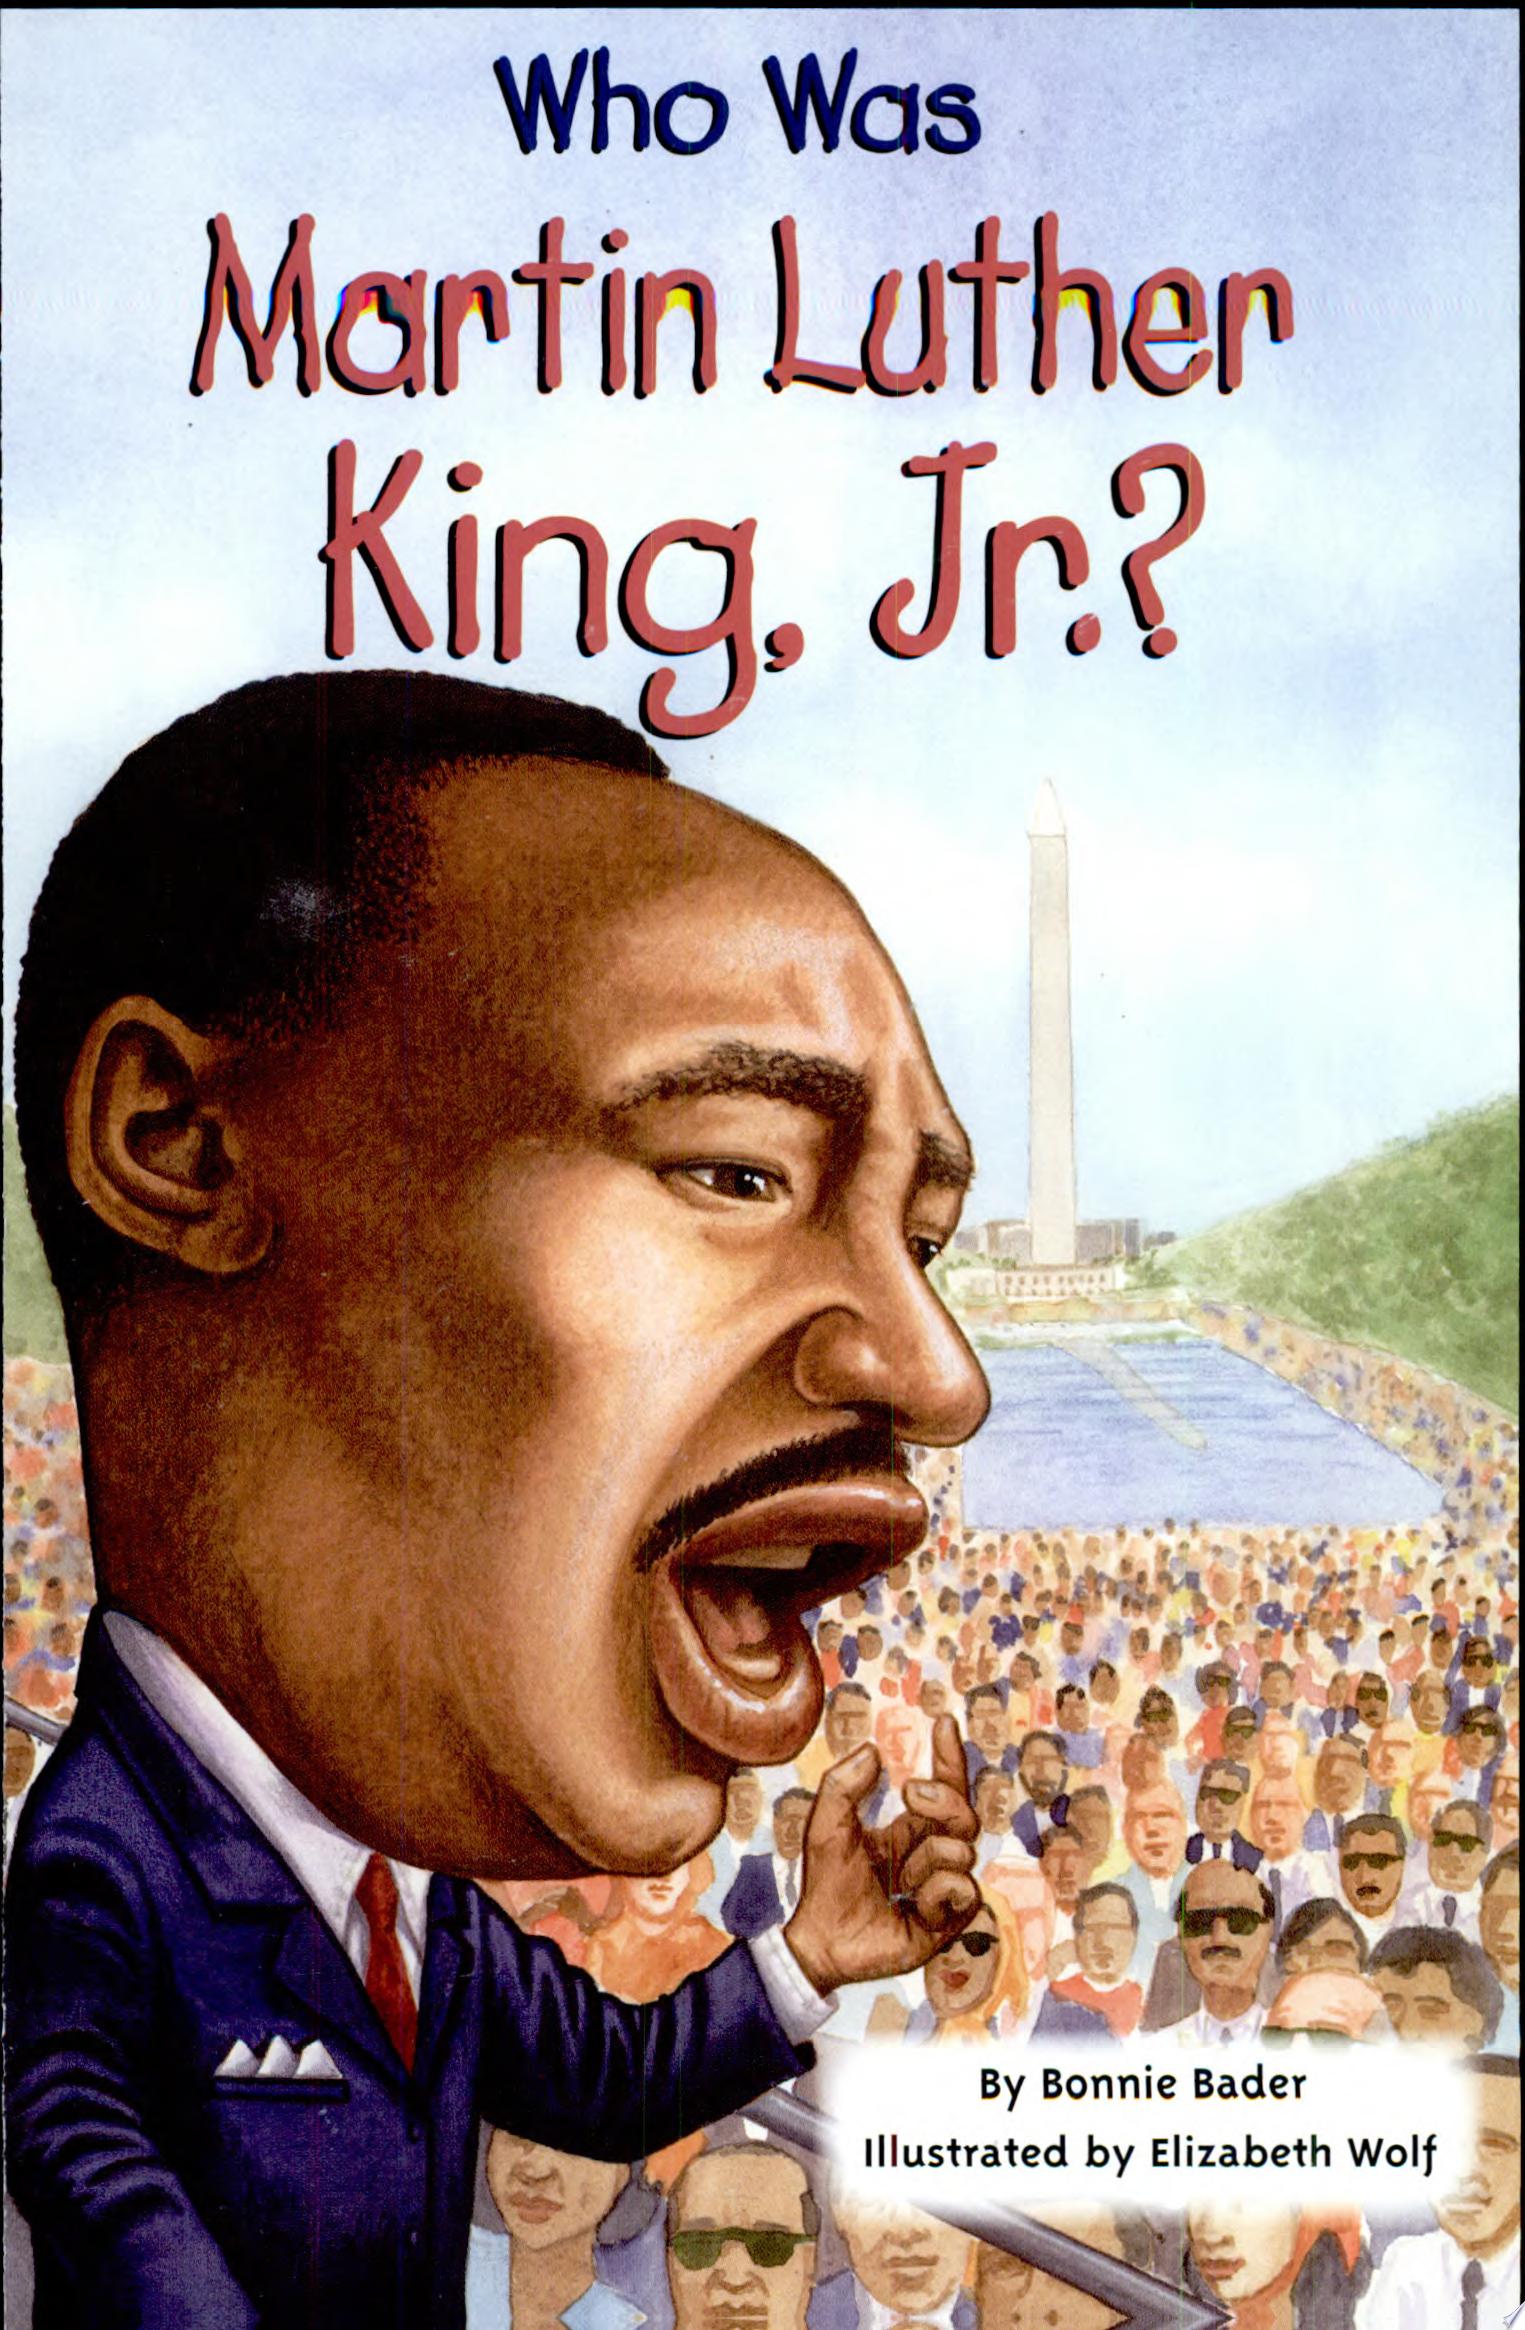 Image for "Who was Martin Luther King, Jr.?"